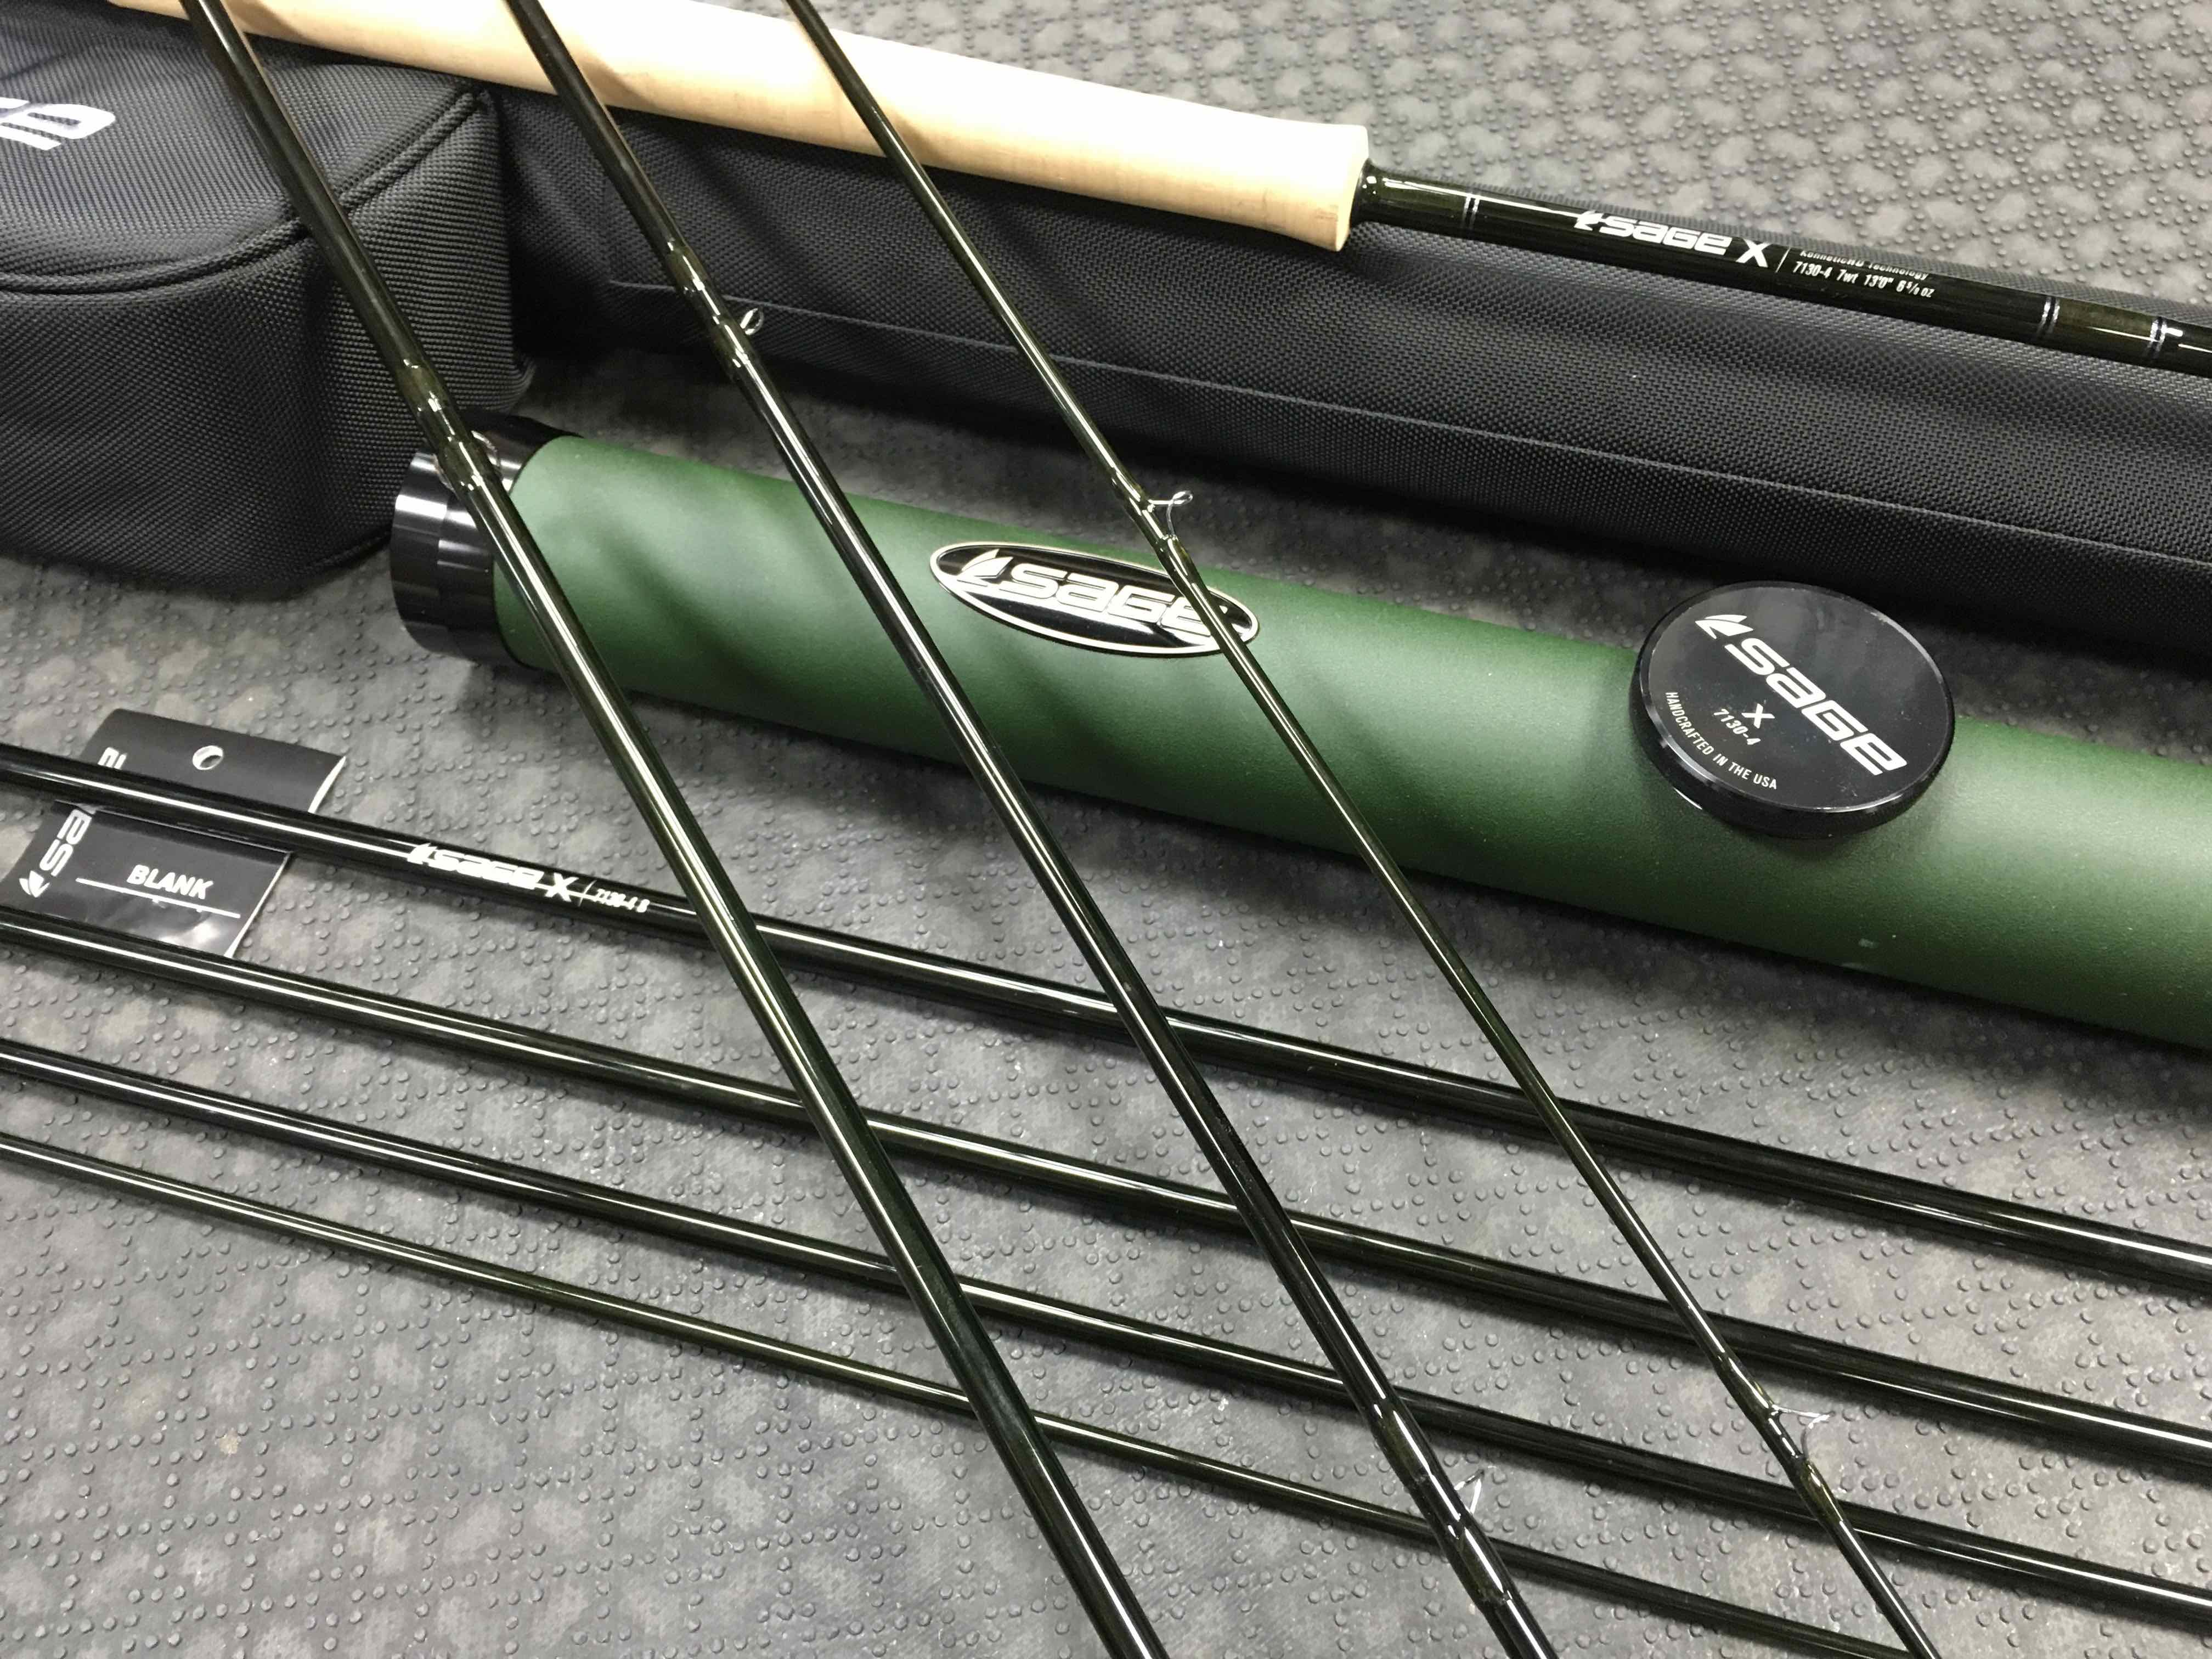 https://hooklineandsinker.ca/wp-content/uploads/2016/09/Sage-X-Single-and-Two-Handed-Fly-Rods-and-Blanks-CC.jpg